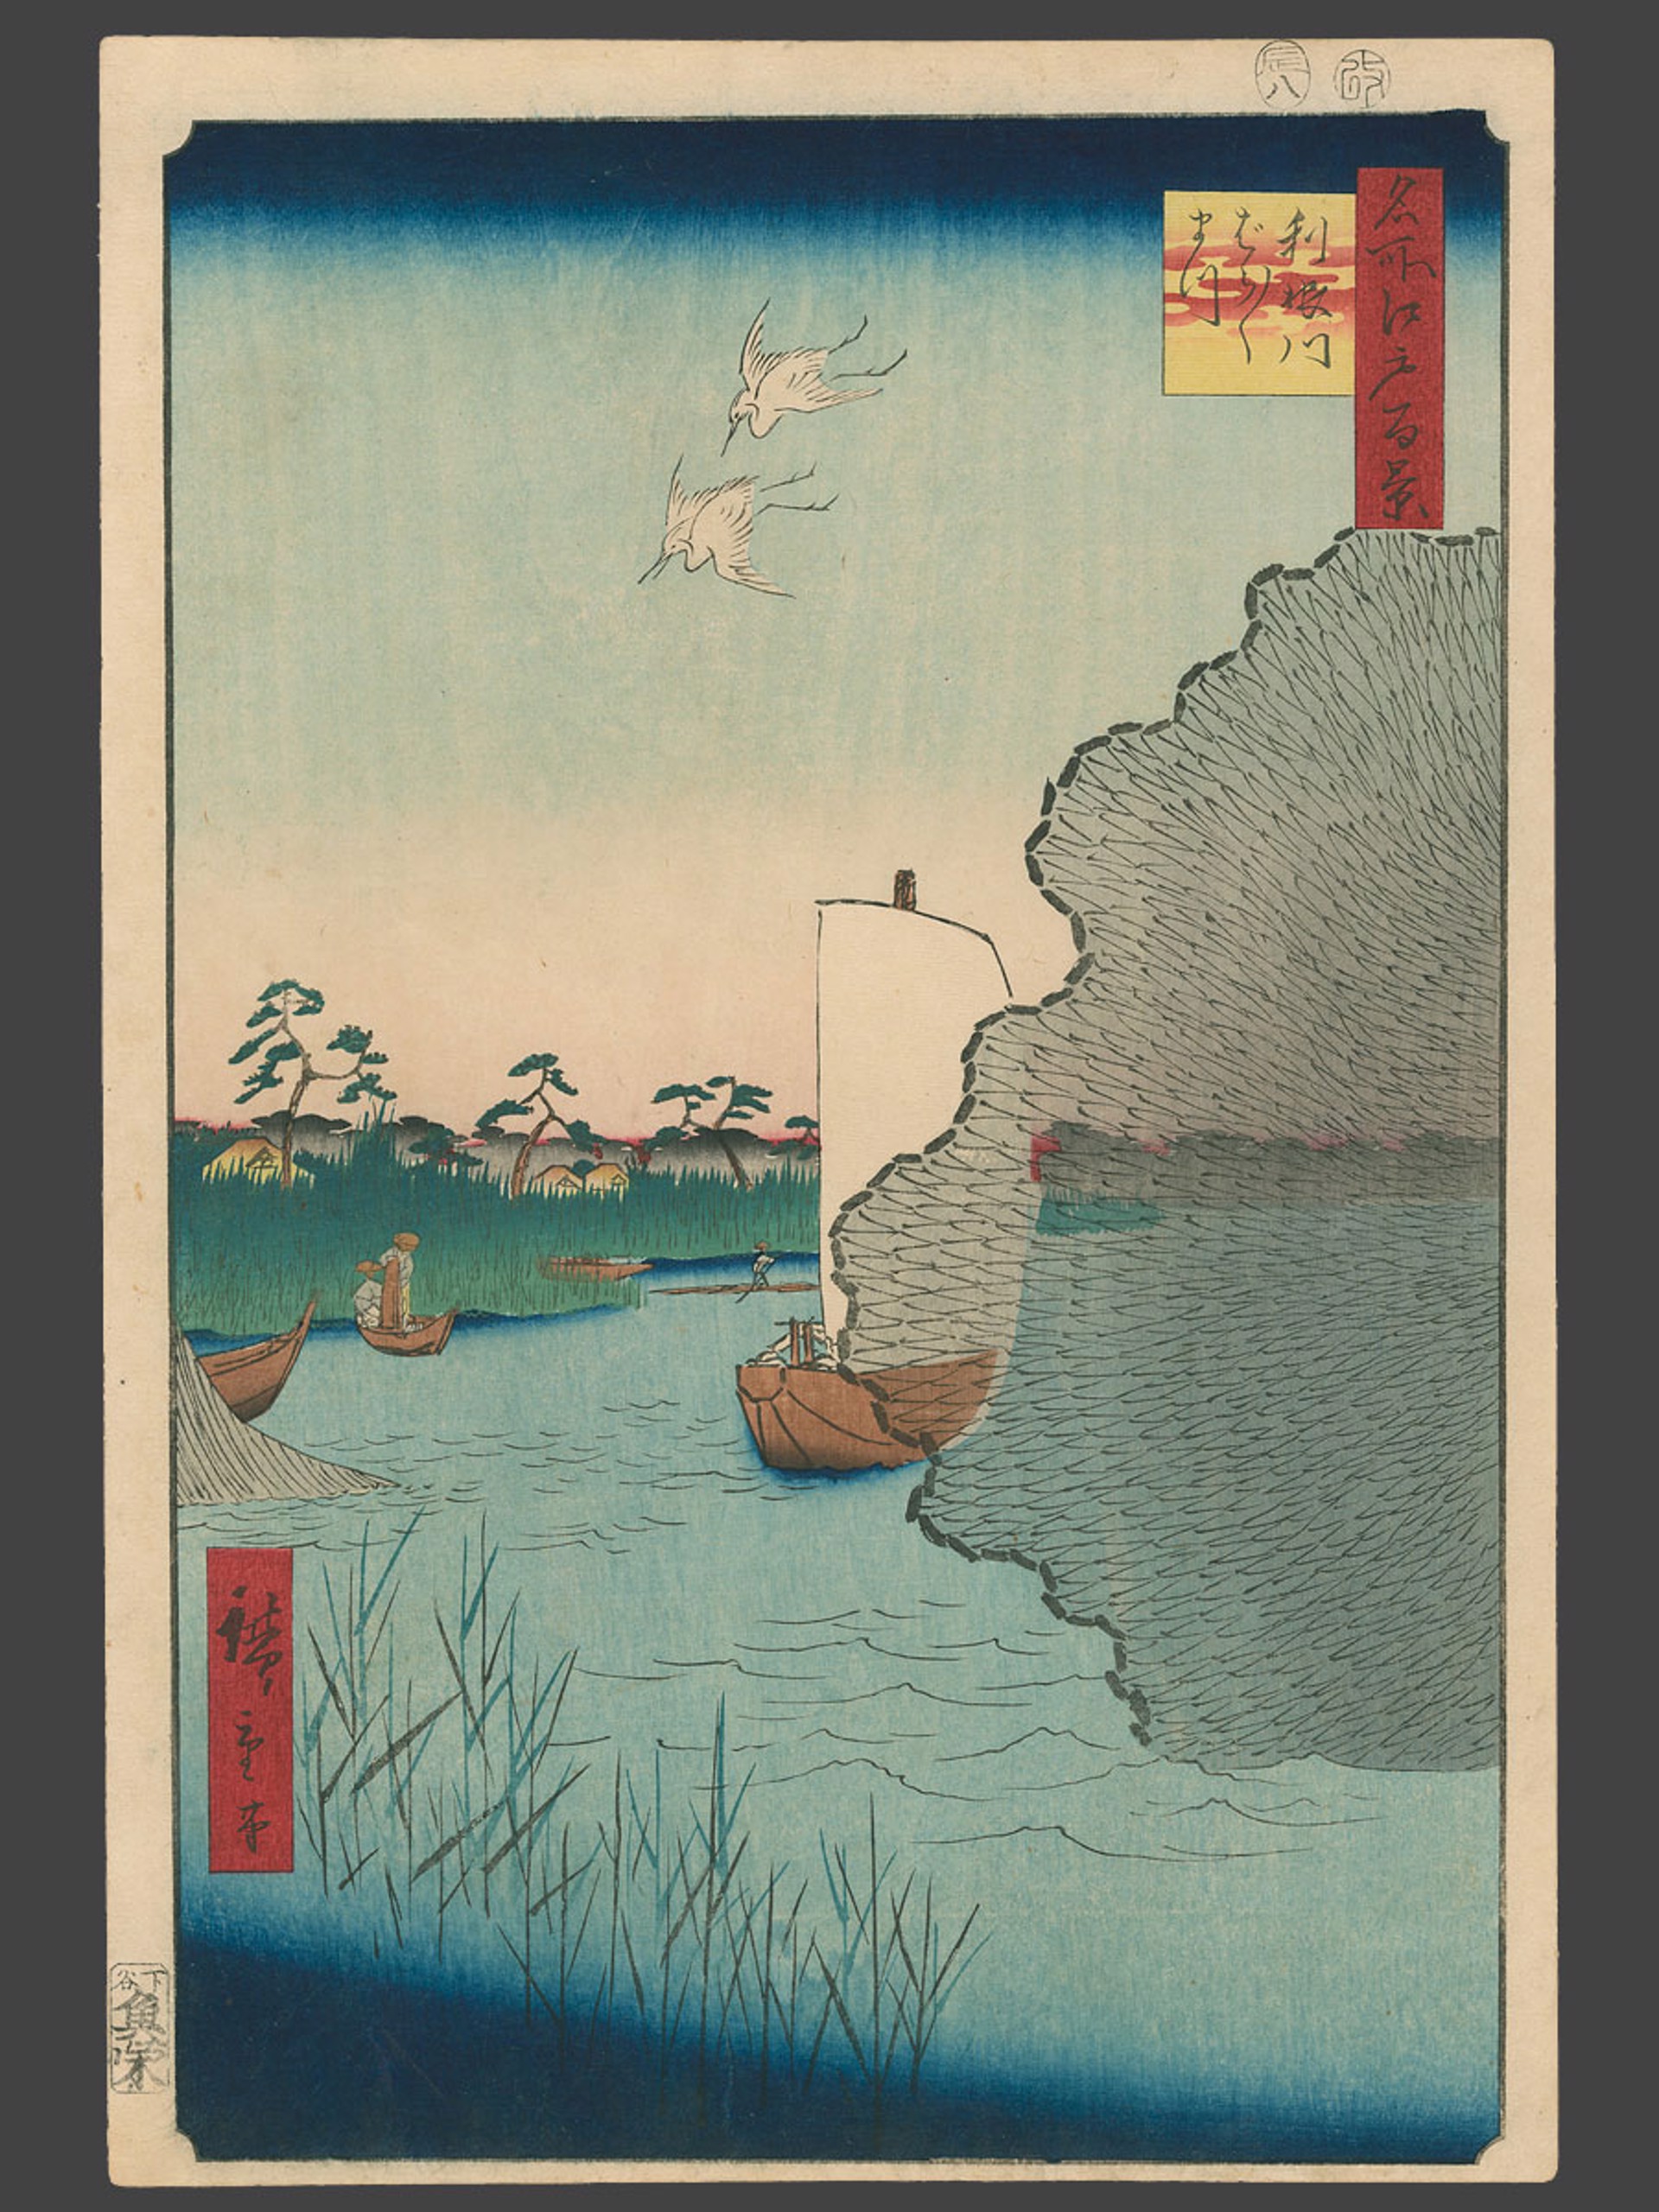 #71 Scattered Pines, Tone River 100 Views of Edo by Hiroshige